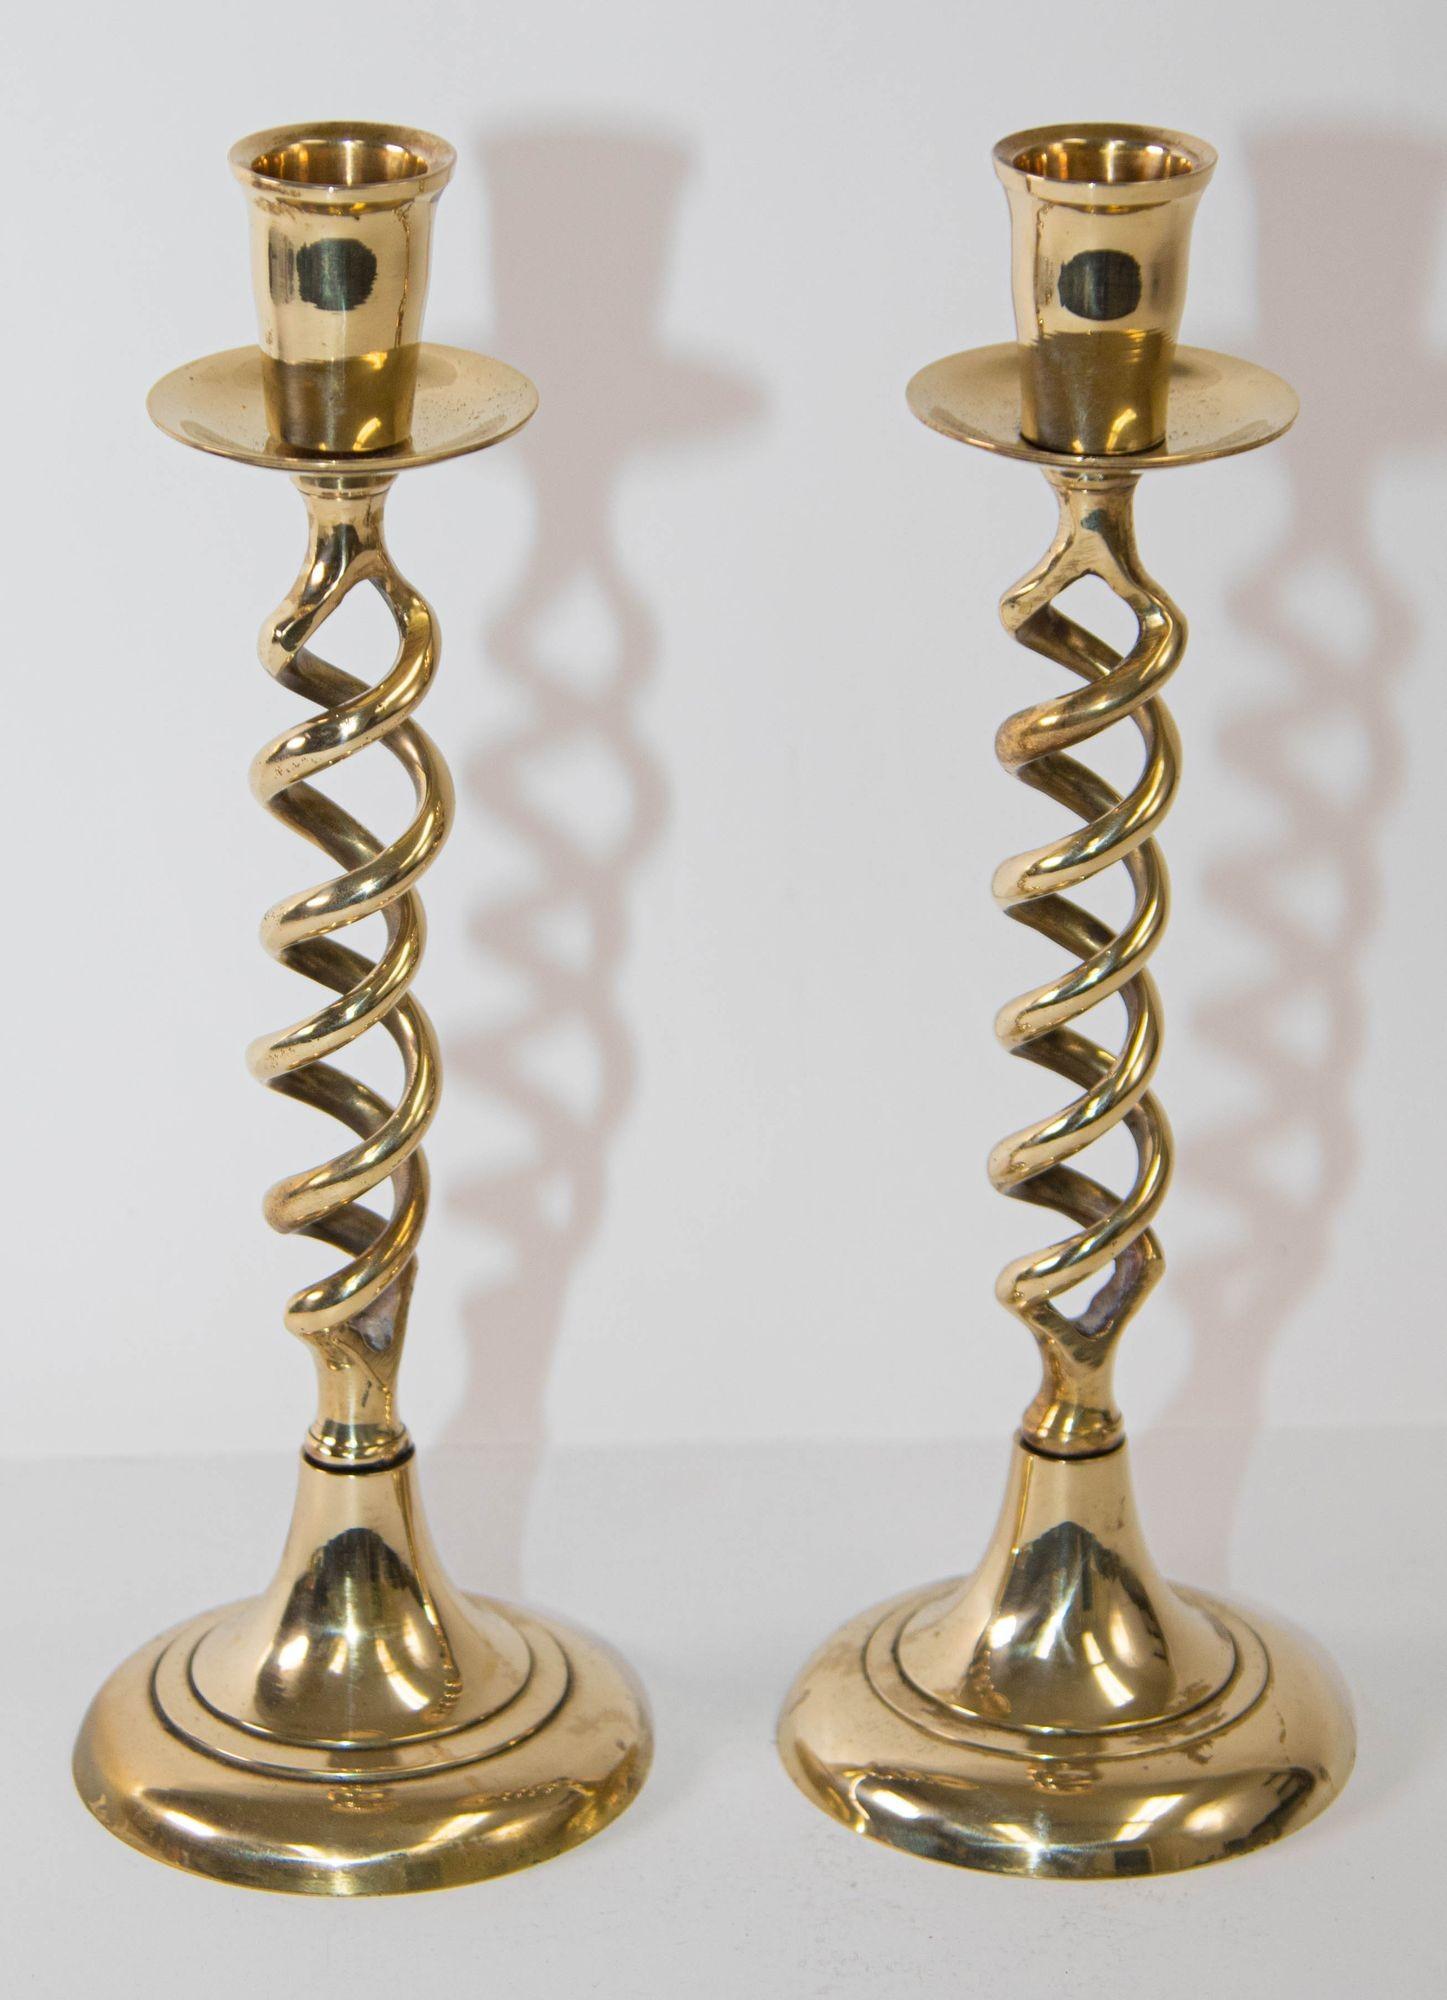 Elegant Antique Victorian brass pair of barley twist candlesticks on round base.
A rare and sought after model with open twisted brass work.
Fine pair of Edwardian English brass candlesticks with barley twist design.
The base is very nicely